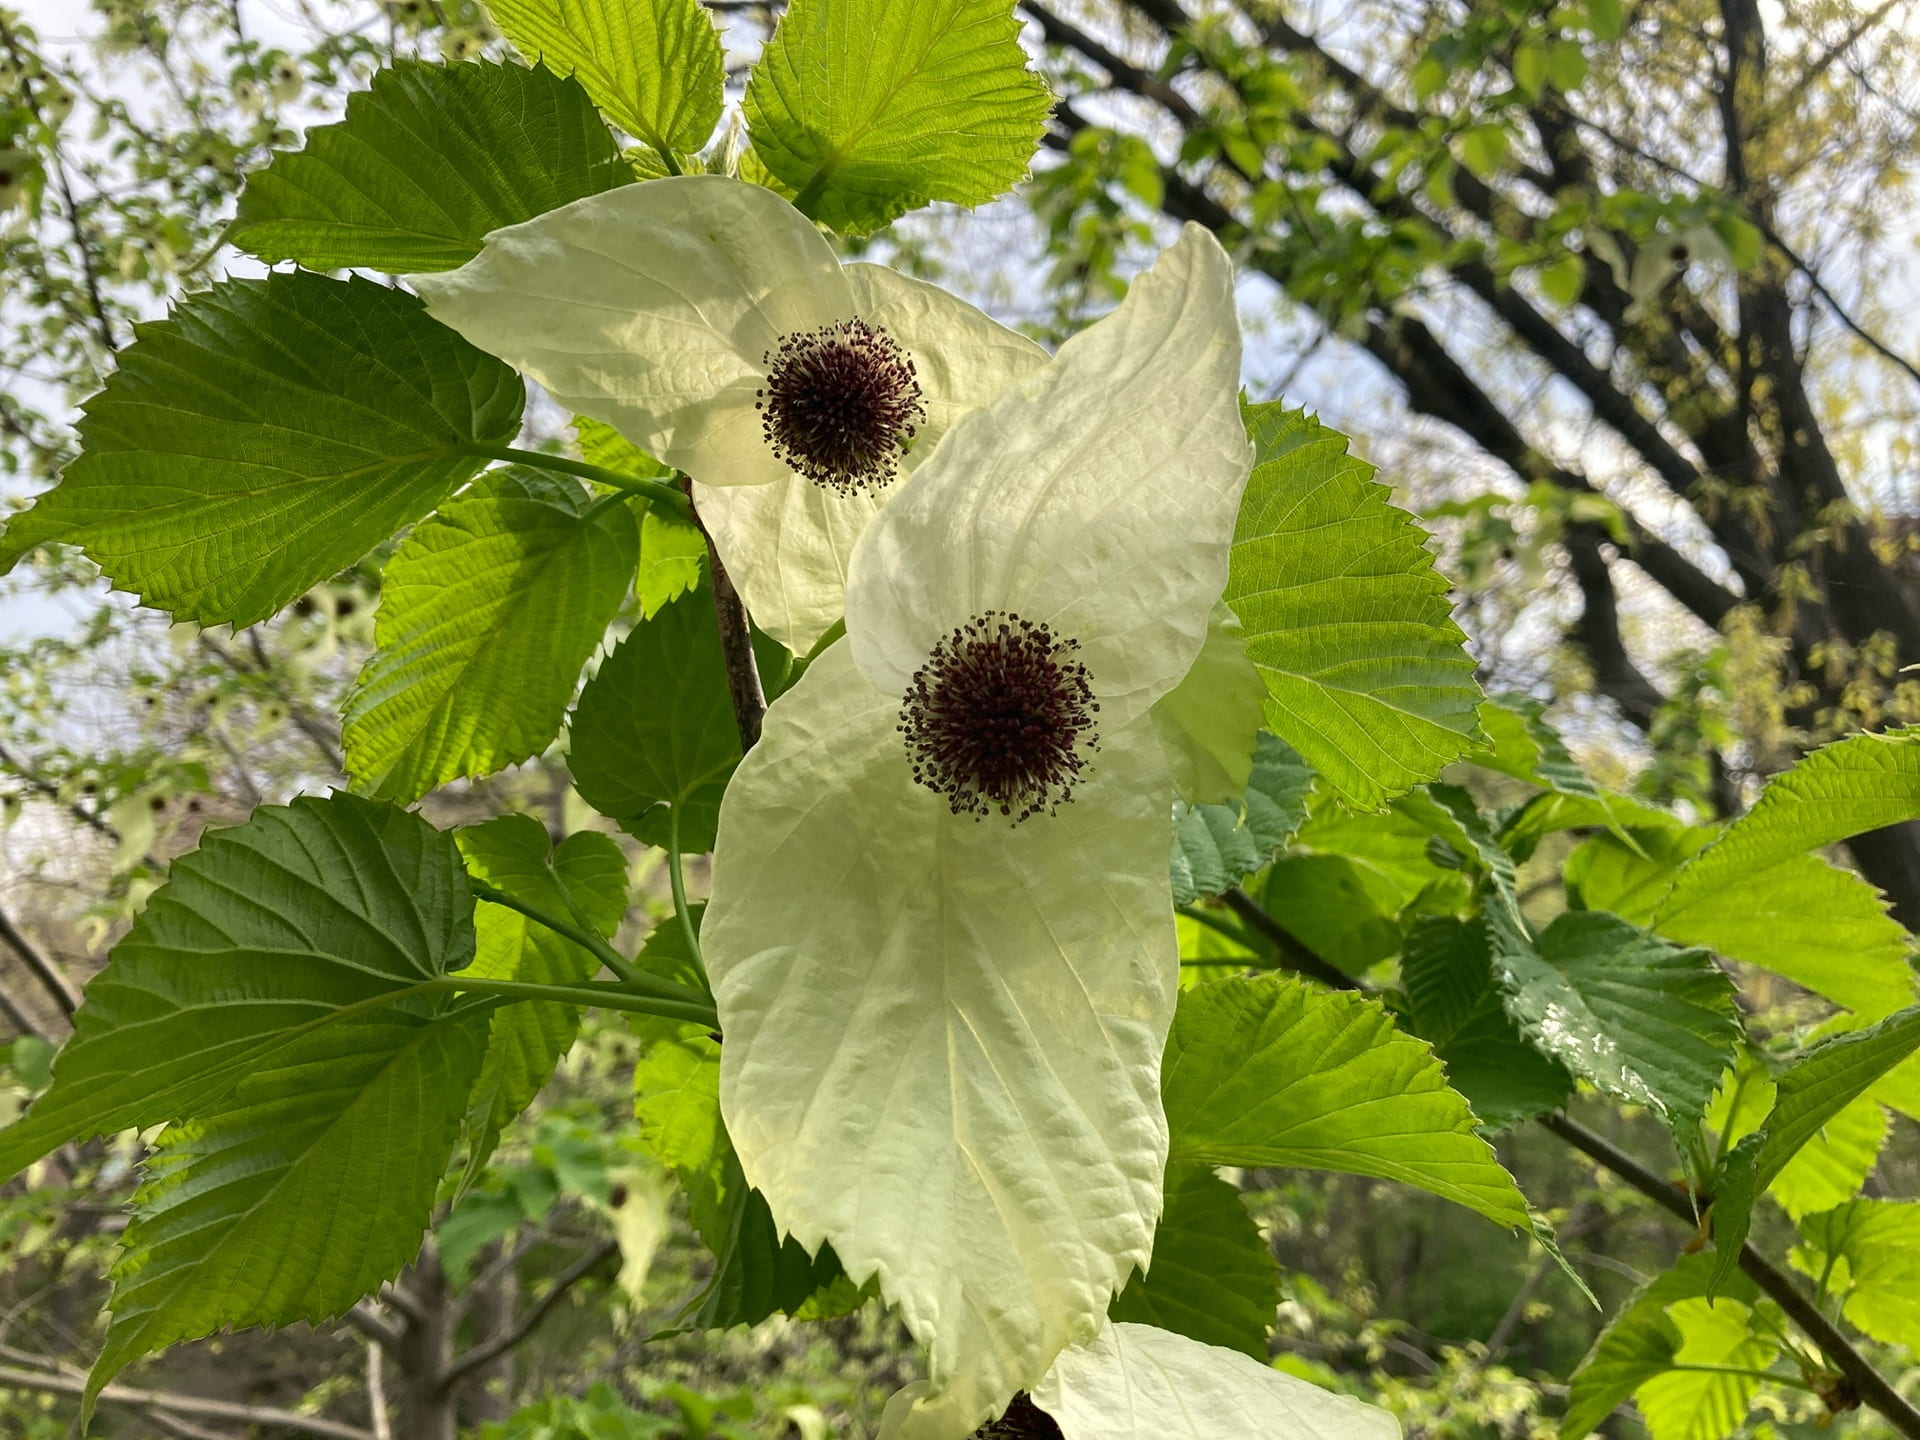 Davidia involucrata (the dove tree) has unique flowers; its white bracts flutter gracefully in the breeze.